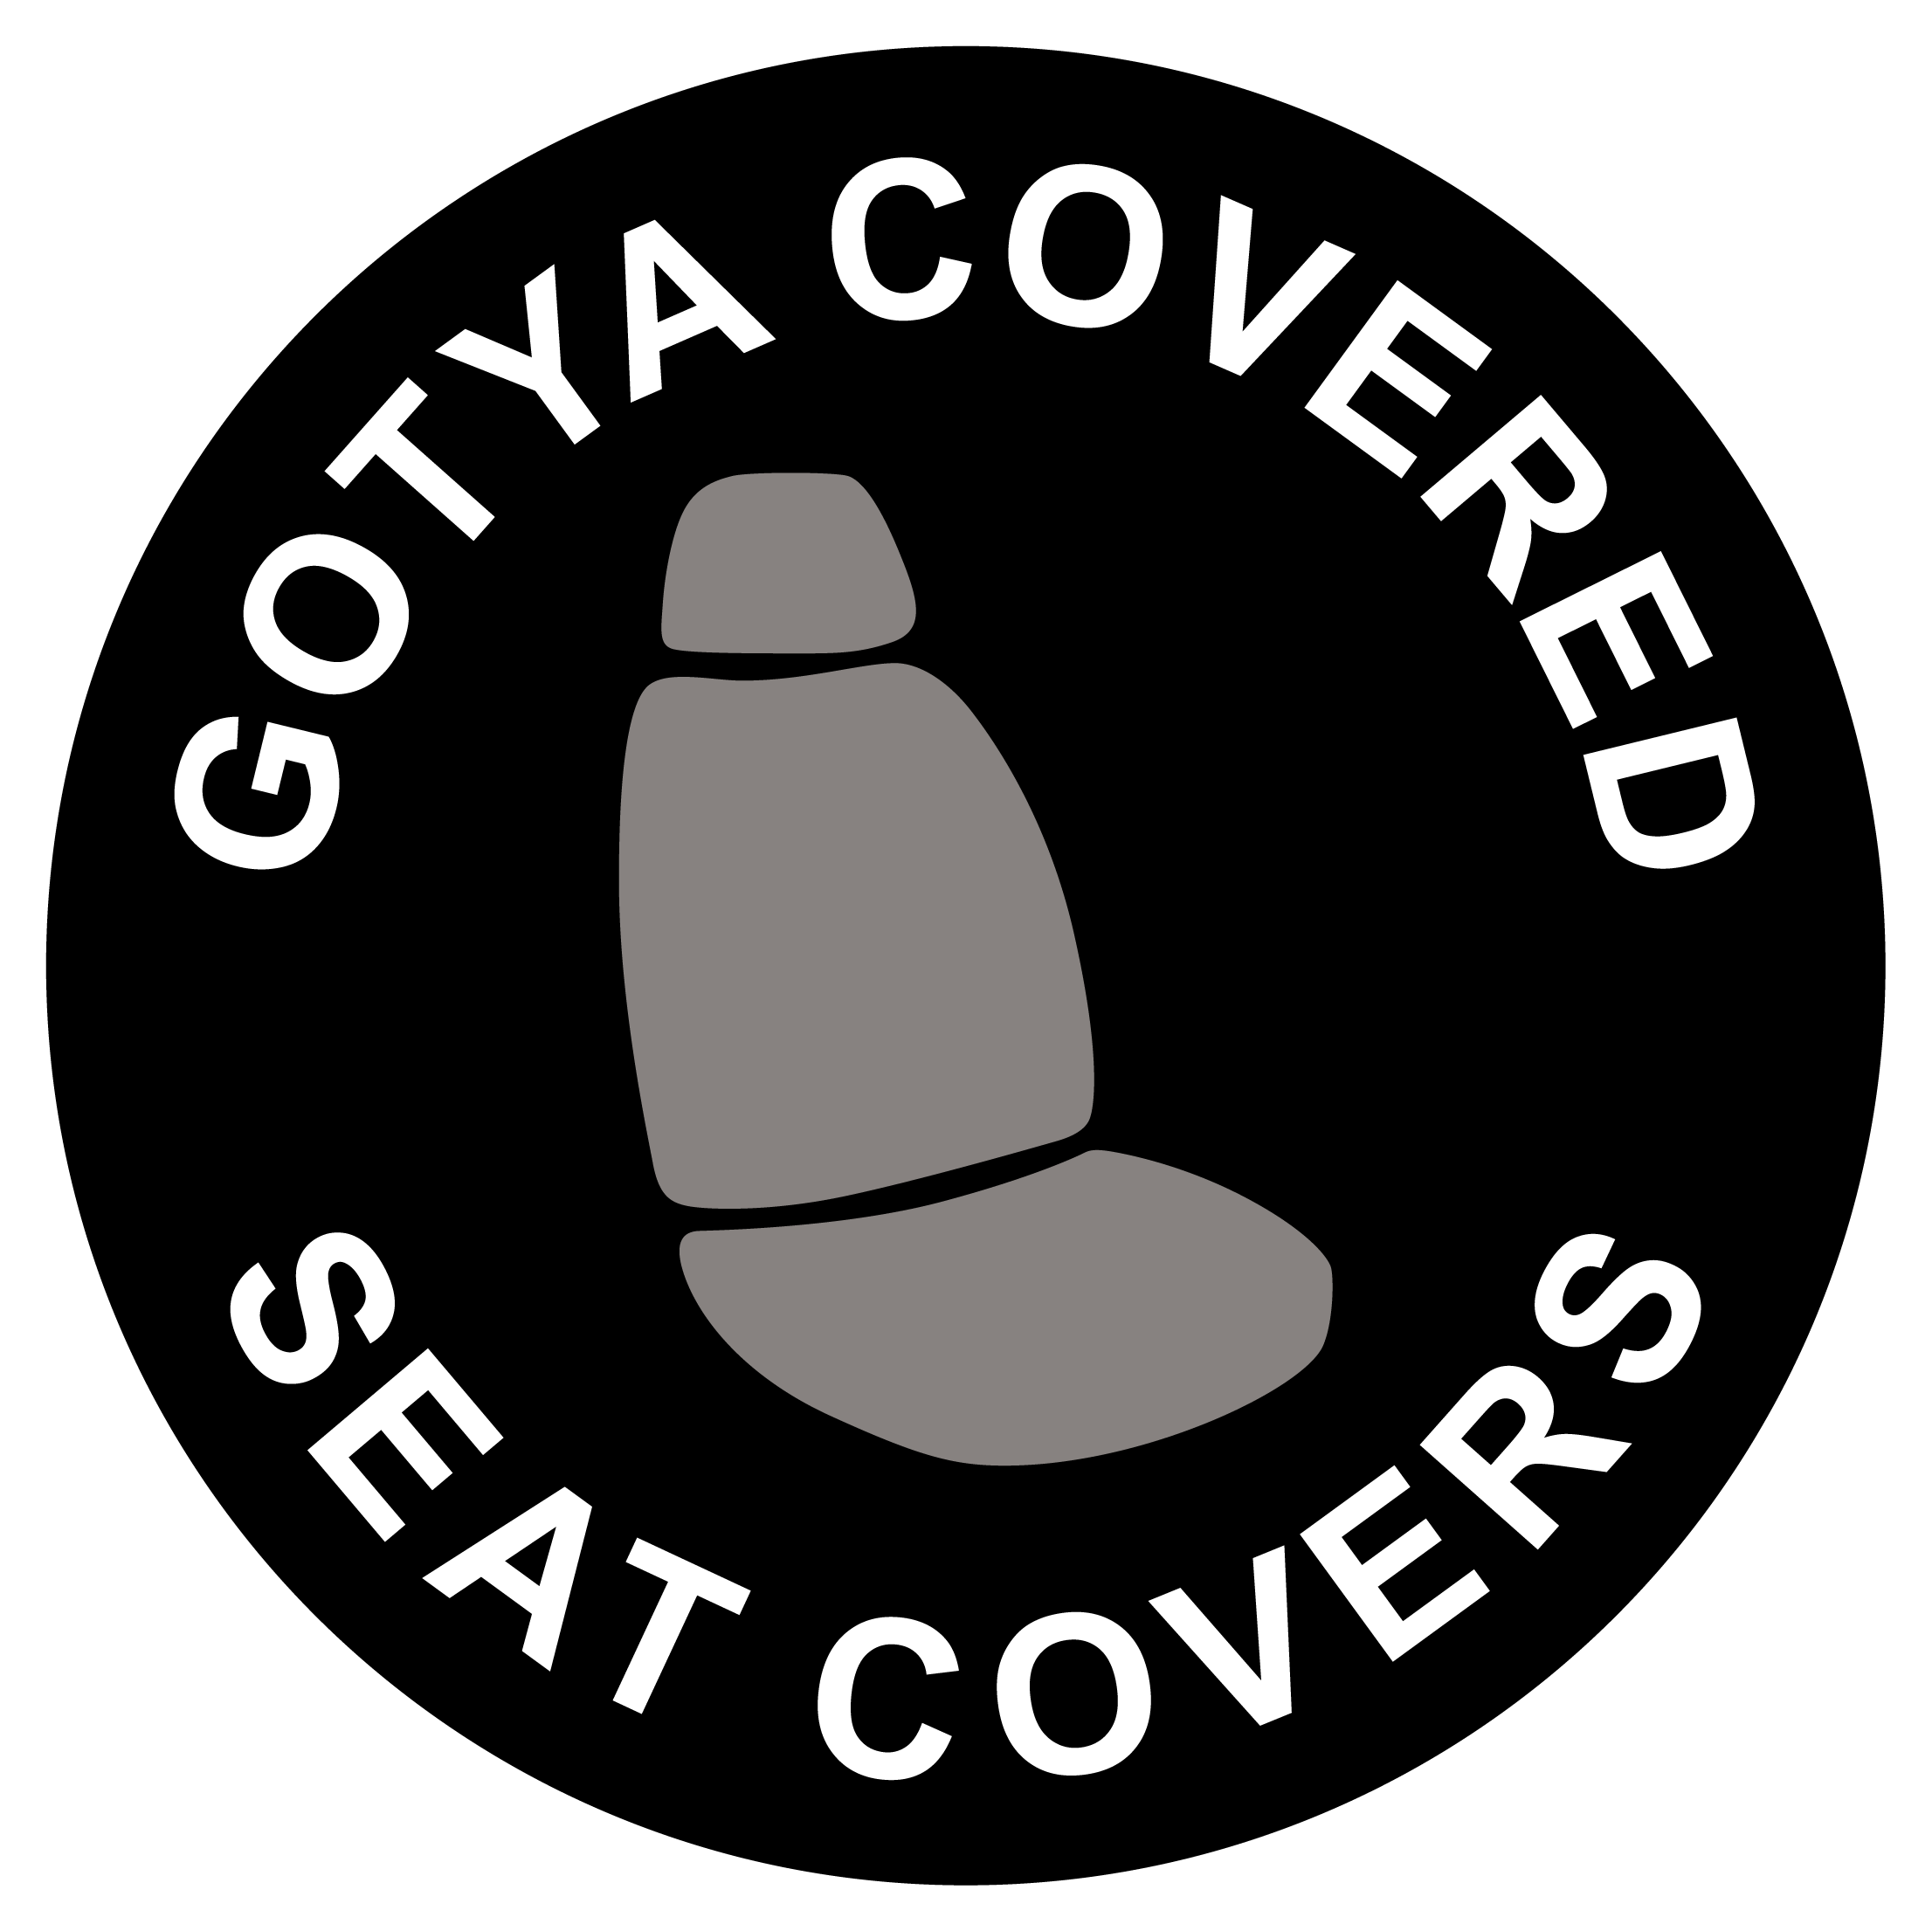 Gotya Covered Seat Covers - The Australian Made Campaign